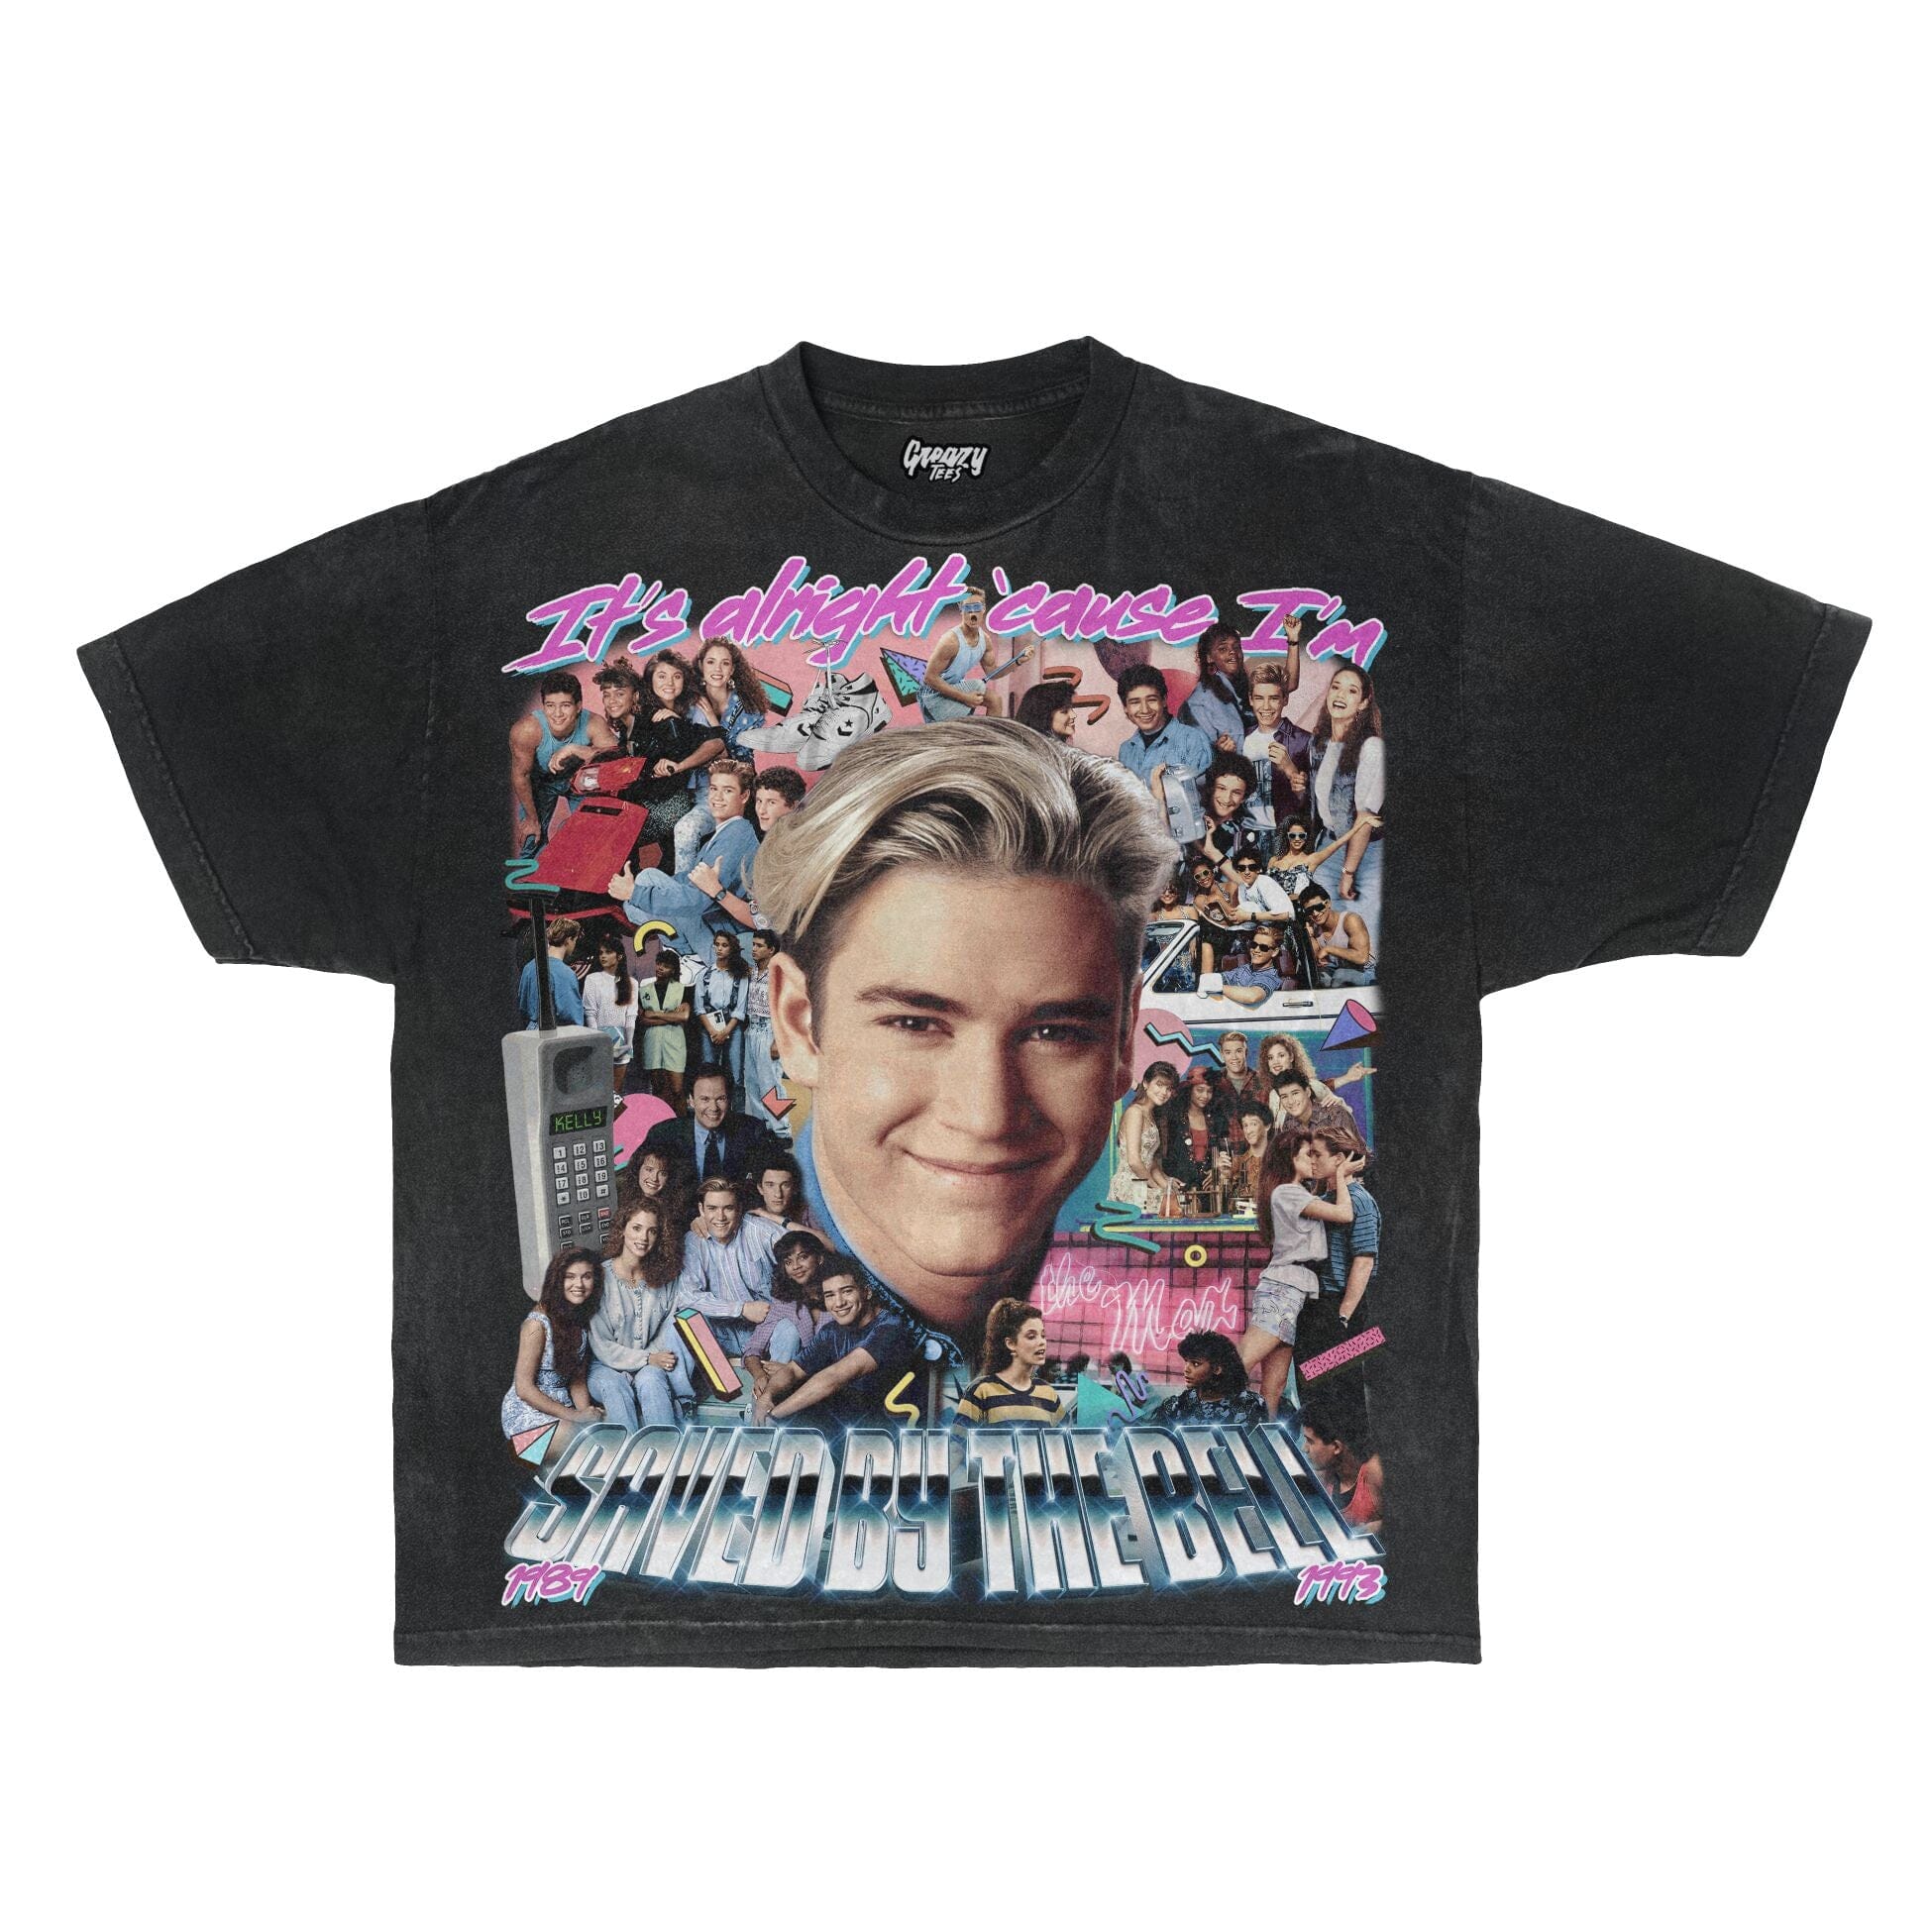 Saved By The Bell Tee Tee Greazy Tees XS Black Oversized